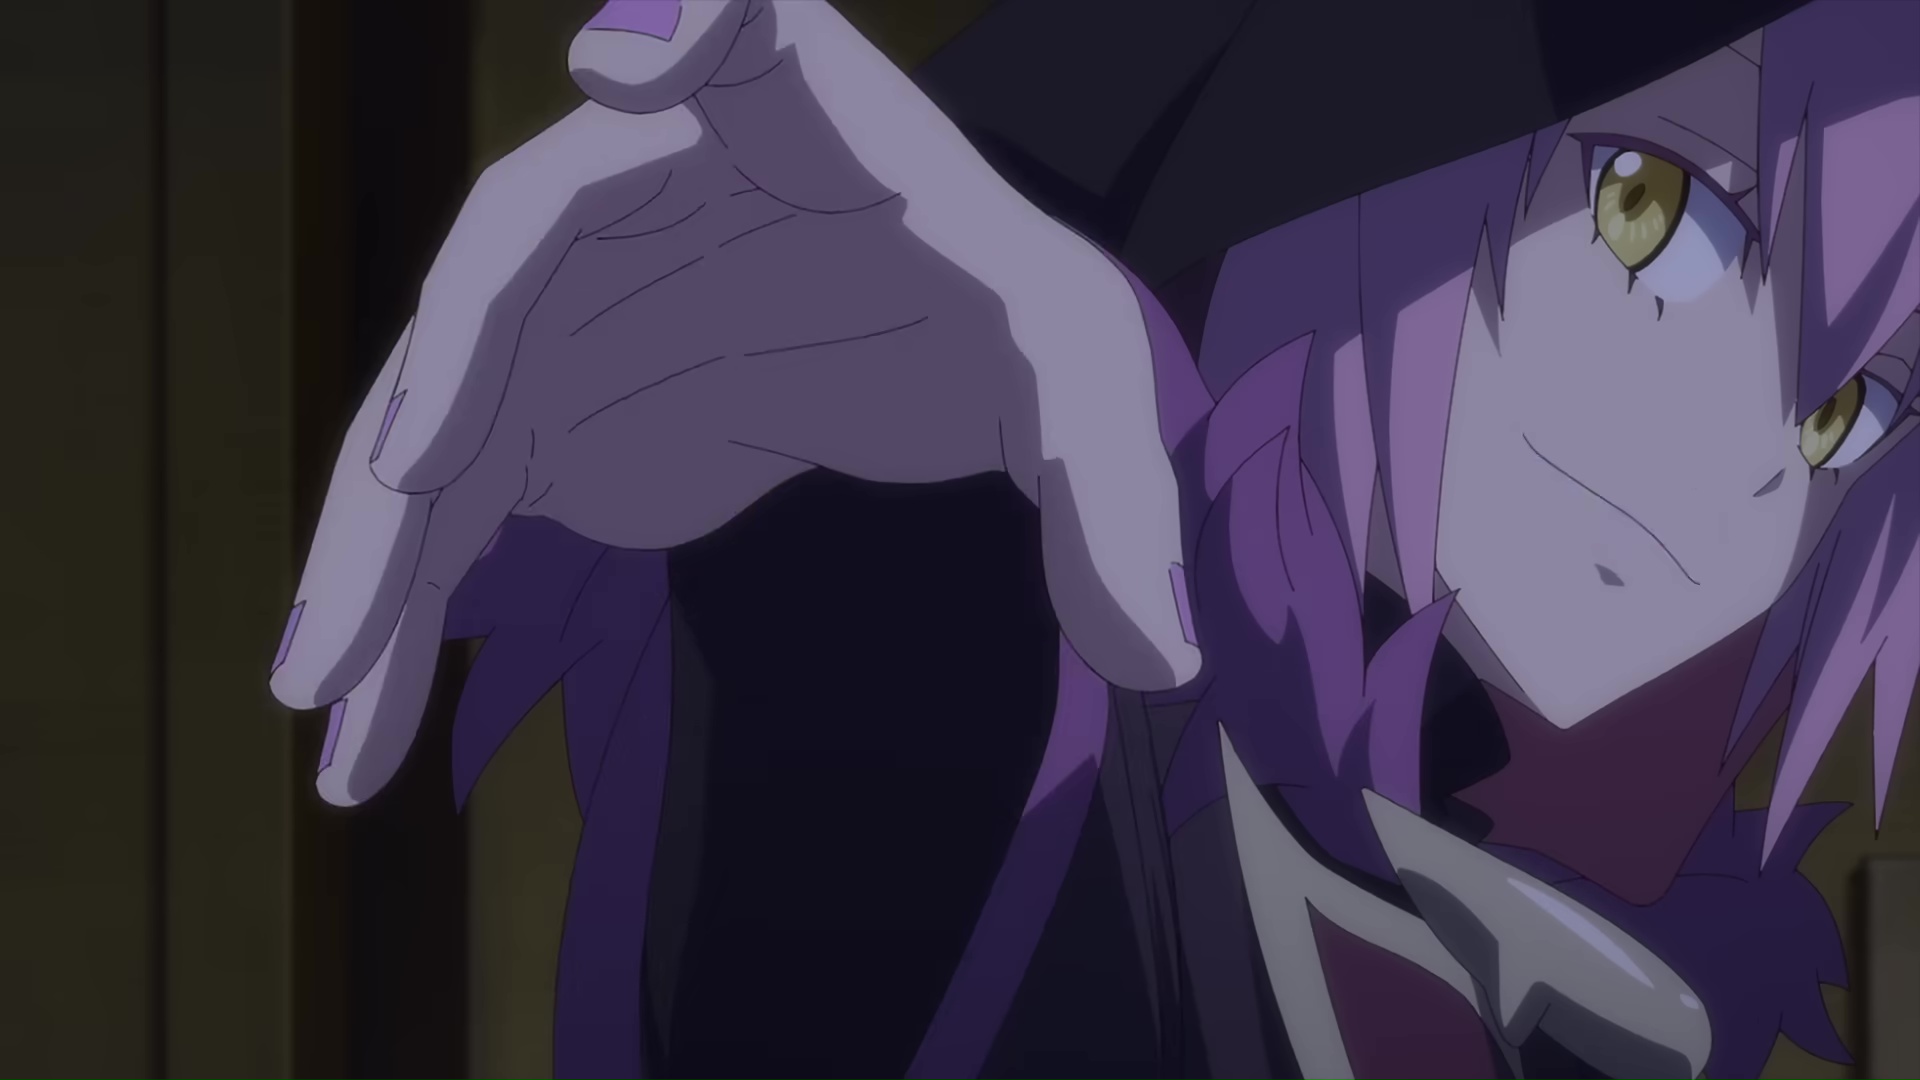 That Time I Got Reincarnated as a Slime: Visions of Coleus (Anime